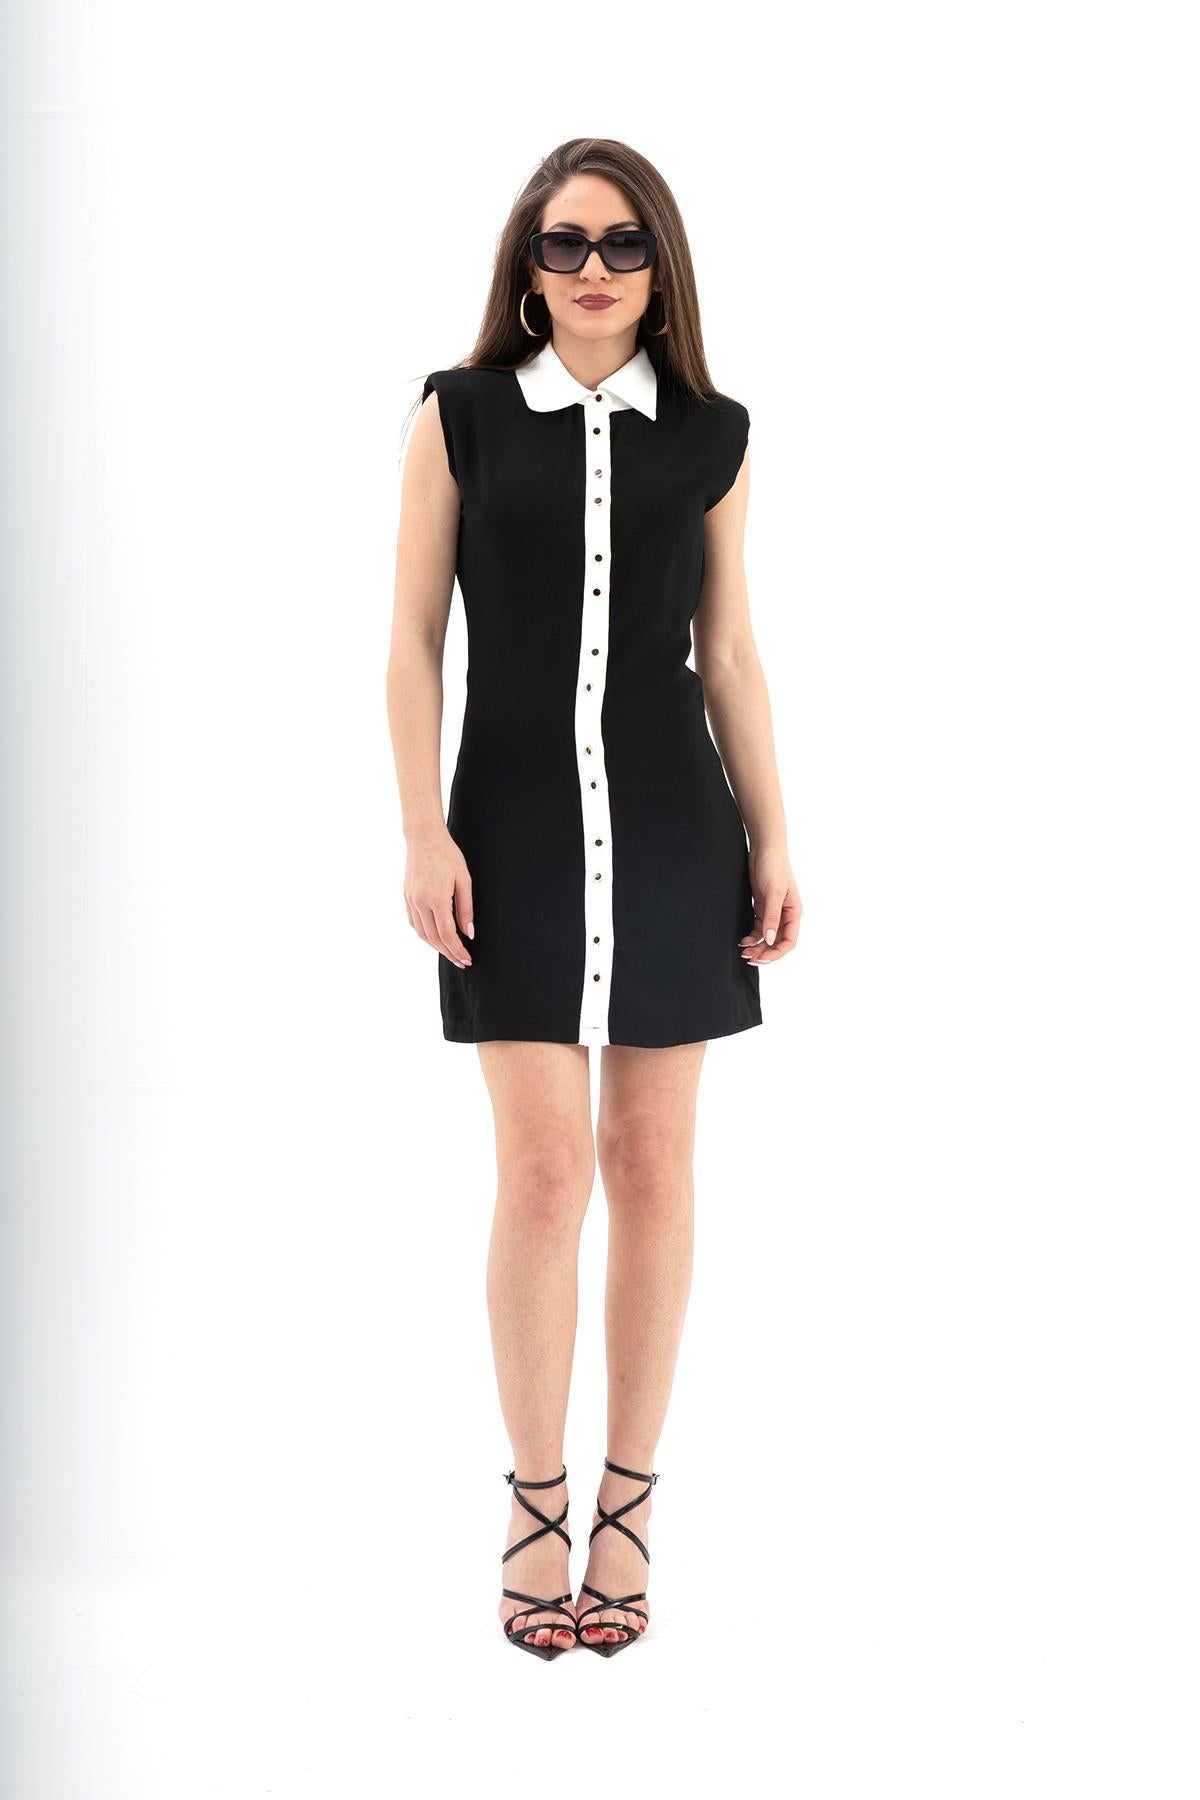 Women's Dress with Padded Shoulders and Zero Cufflinks - Black - STREETMODE™